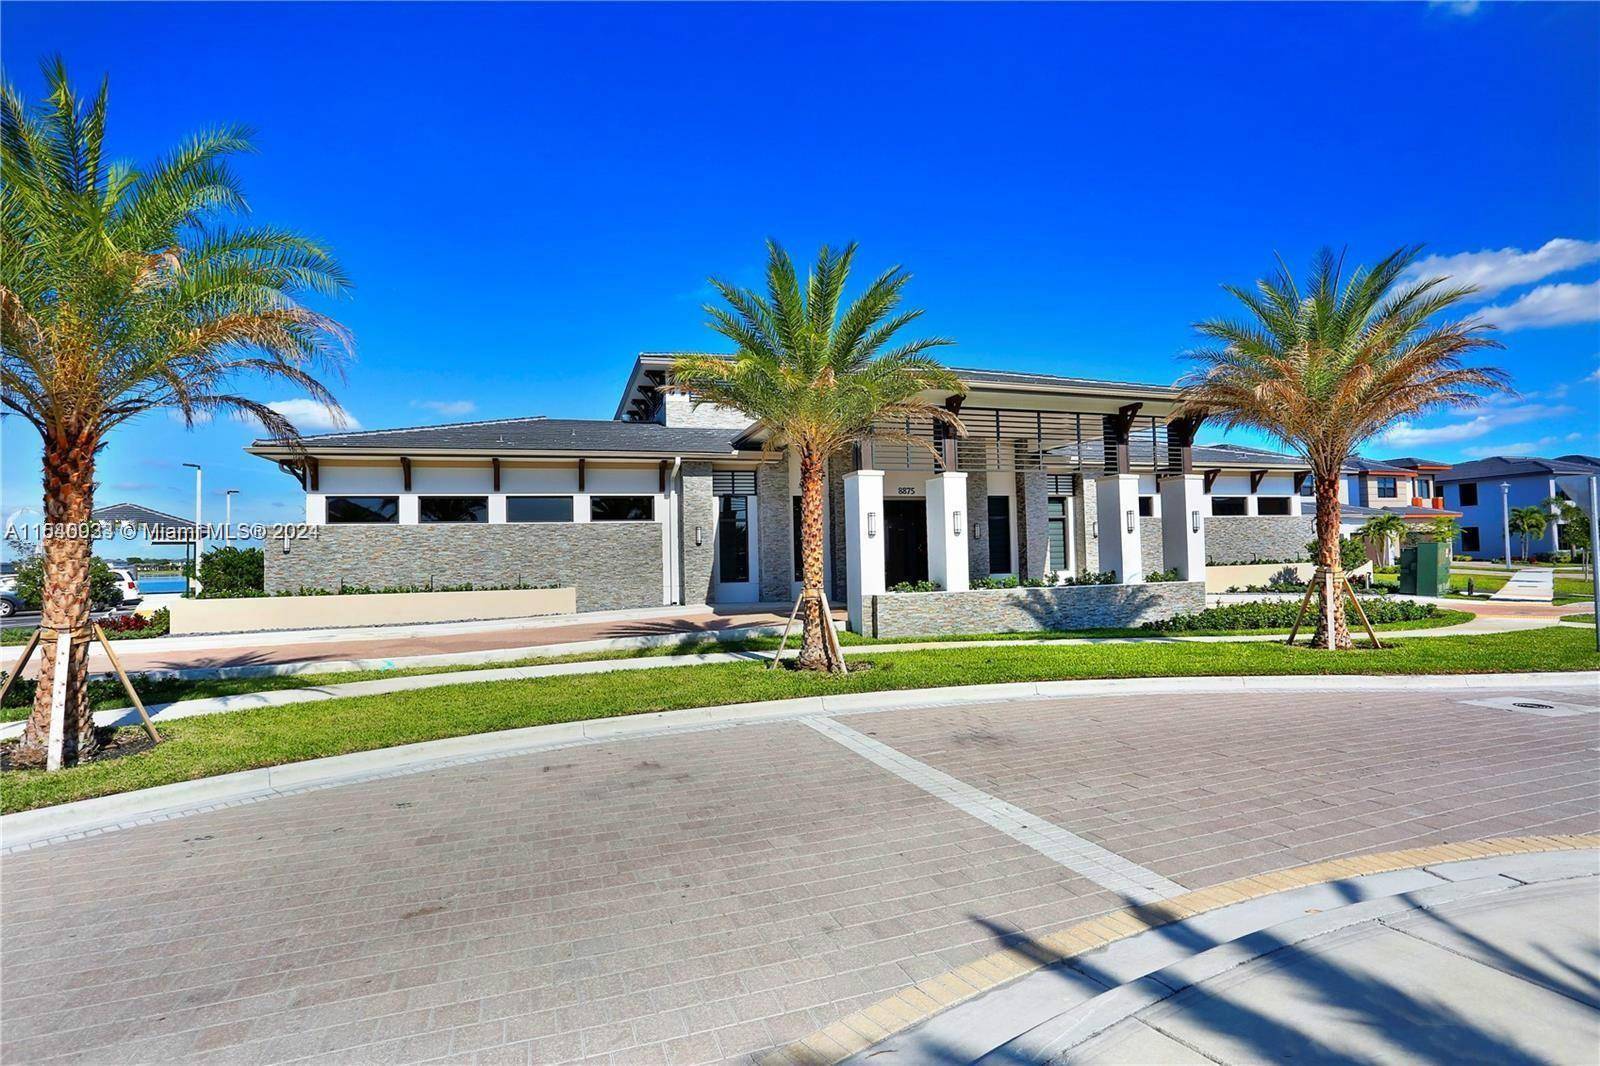 The breathtaking lakefront resort style two story brand new home is located in Miami Lakes exclusive SATORI community !